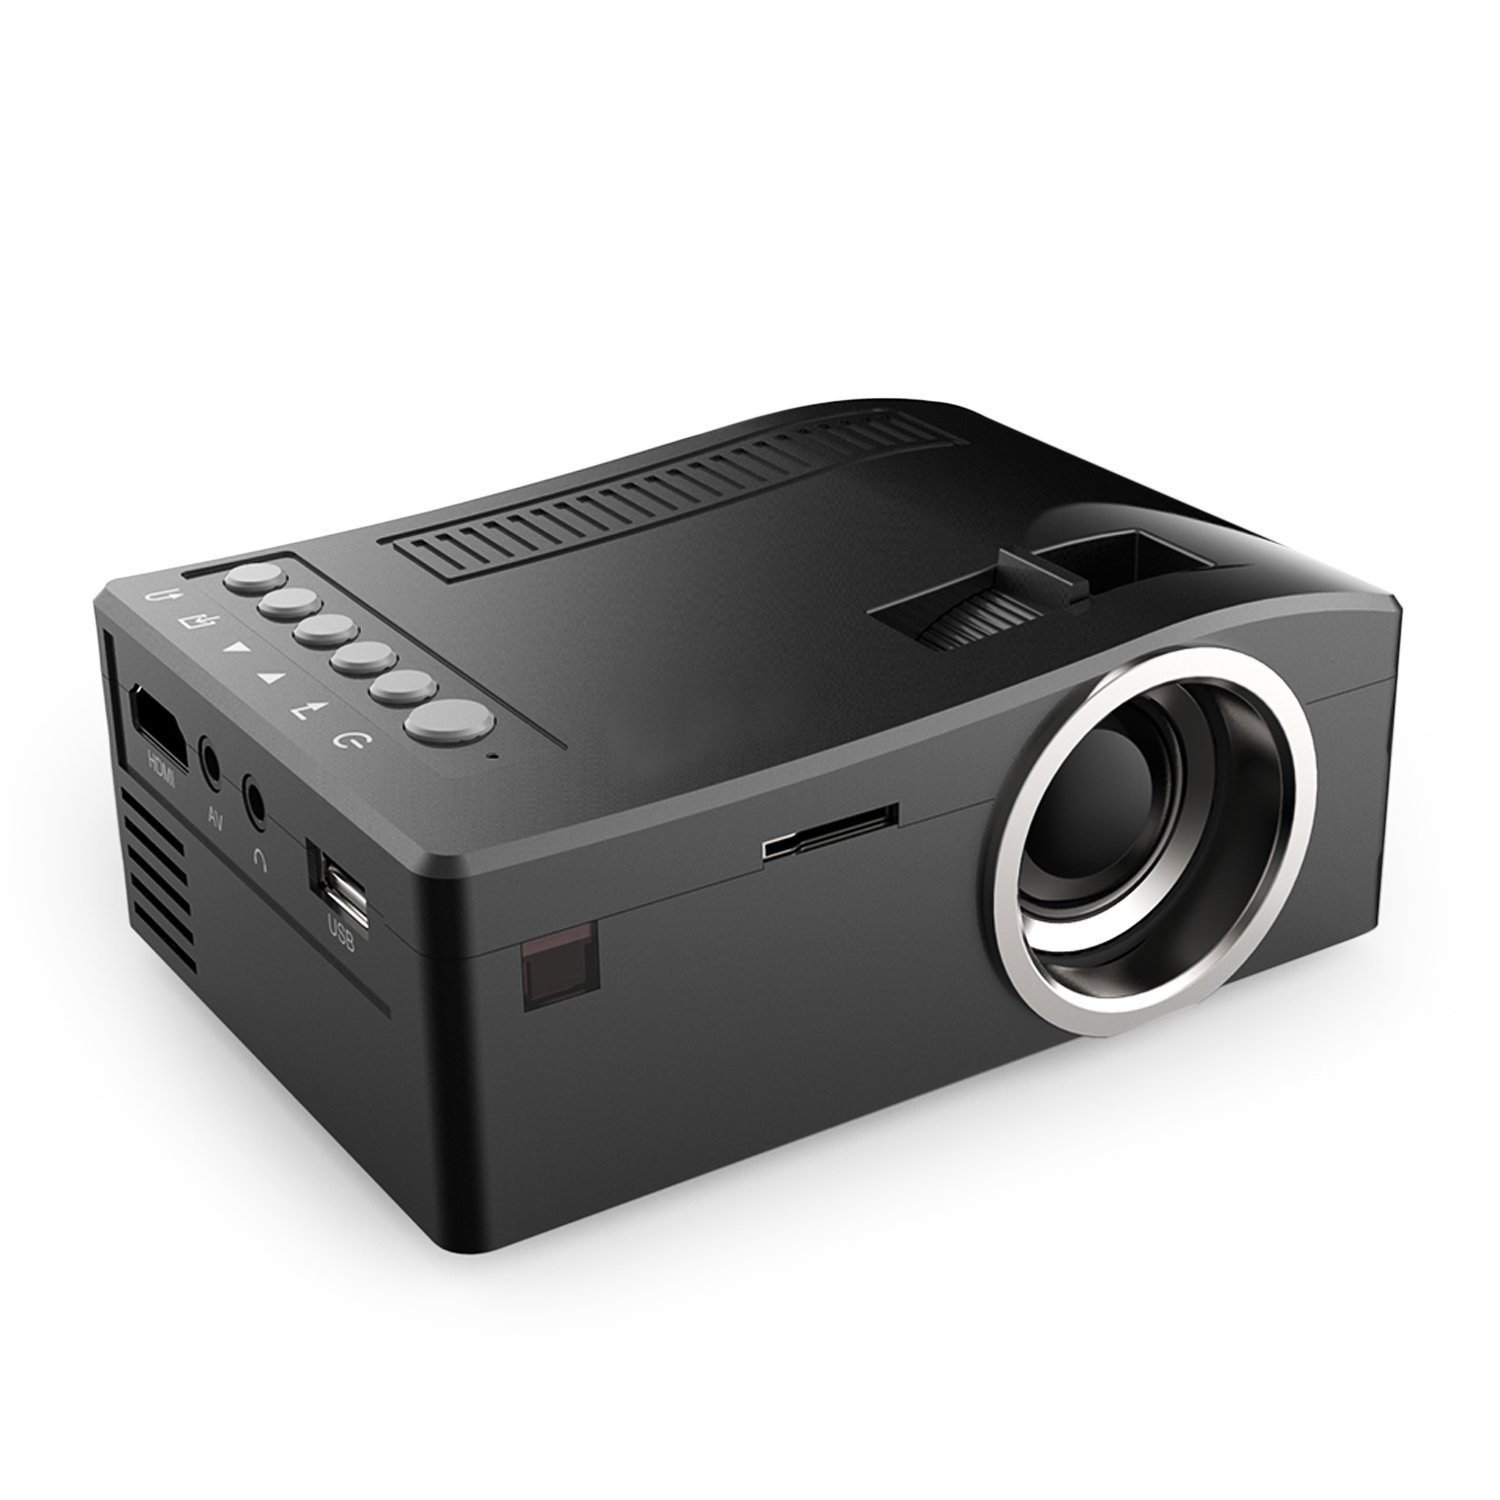 Factory-OEM LCD Home Theater Projector 1080P (1920x1080) 800 Lumens LED 4:3,16:9 (Black)